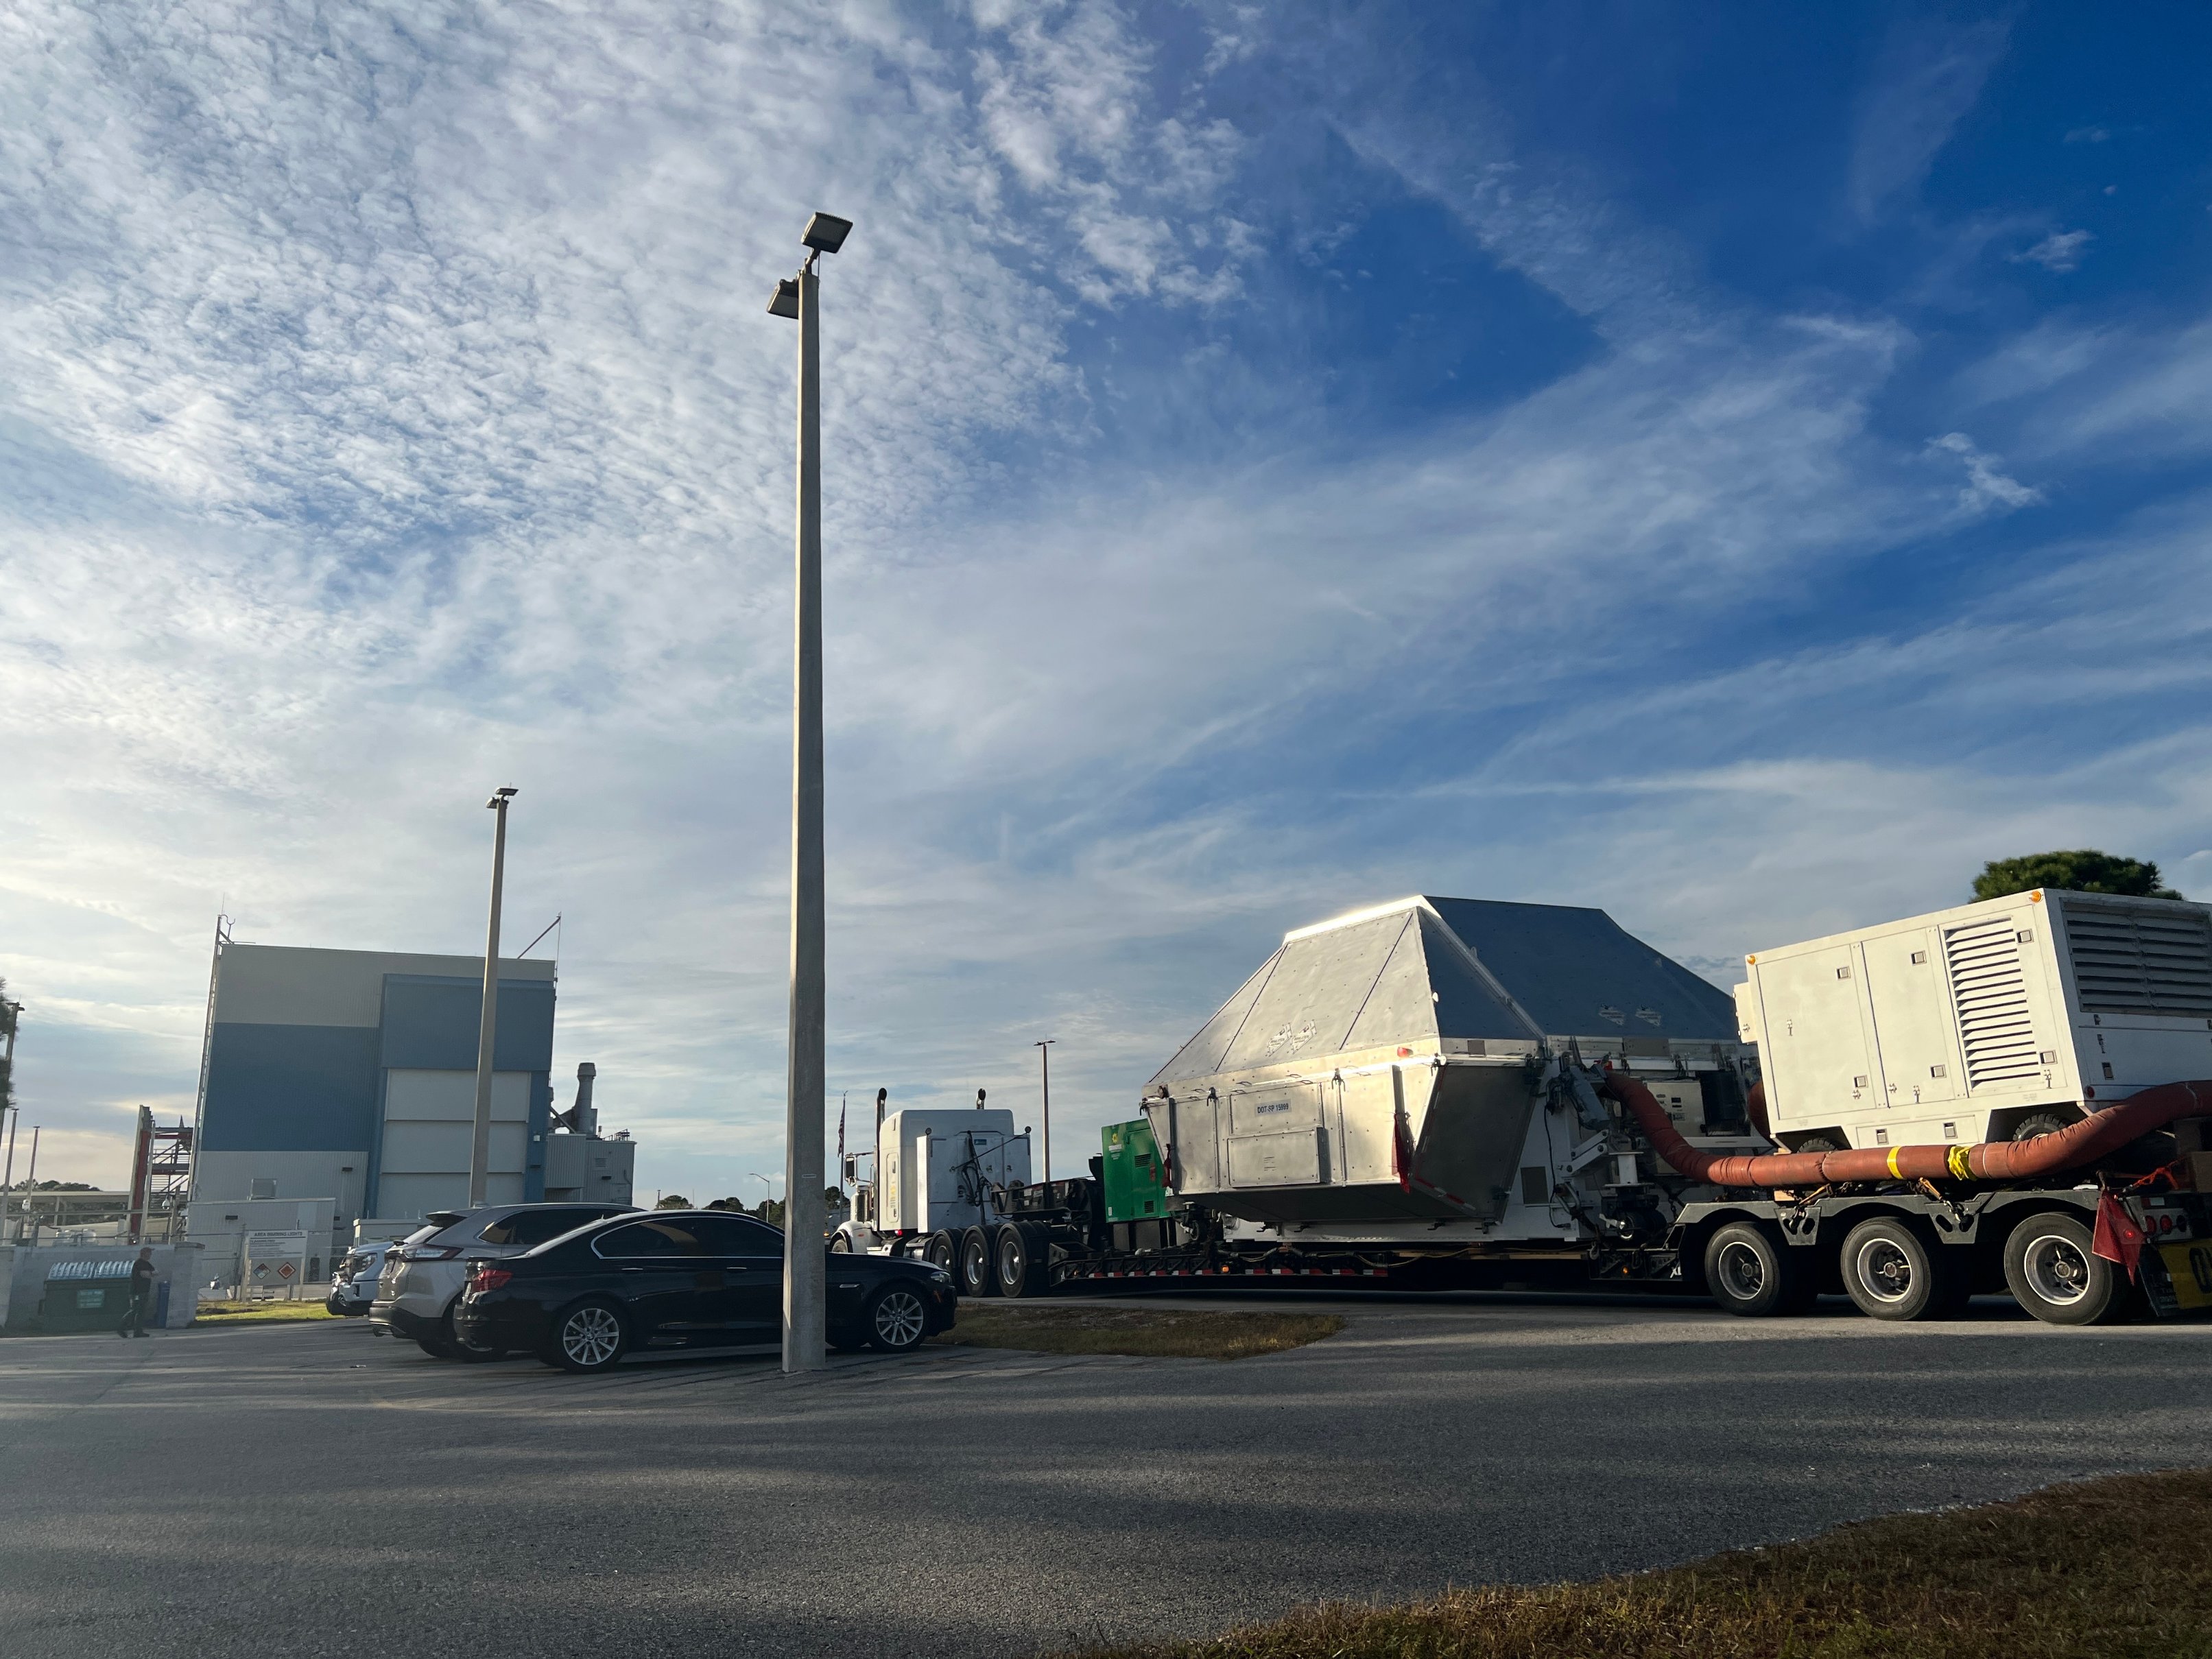 Artemis 1 team members will process and analyze the Orion space capsule, which arrived at Kennedy Space Center in Florida on Dec. 30, 2022.